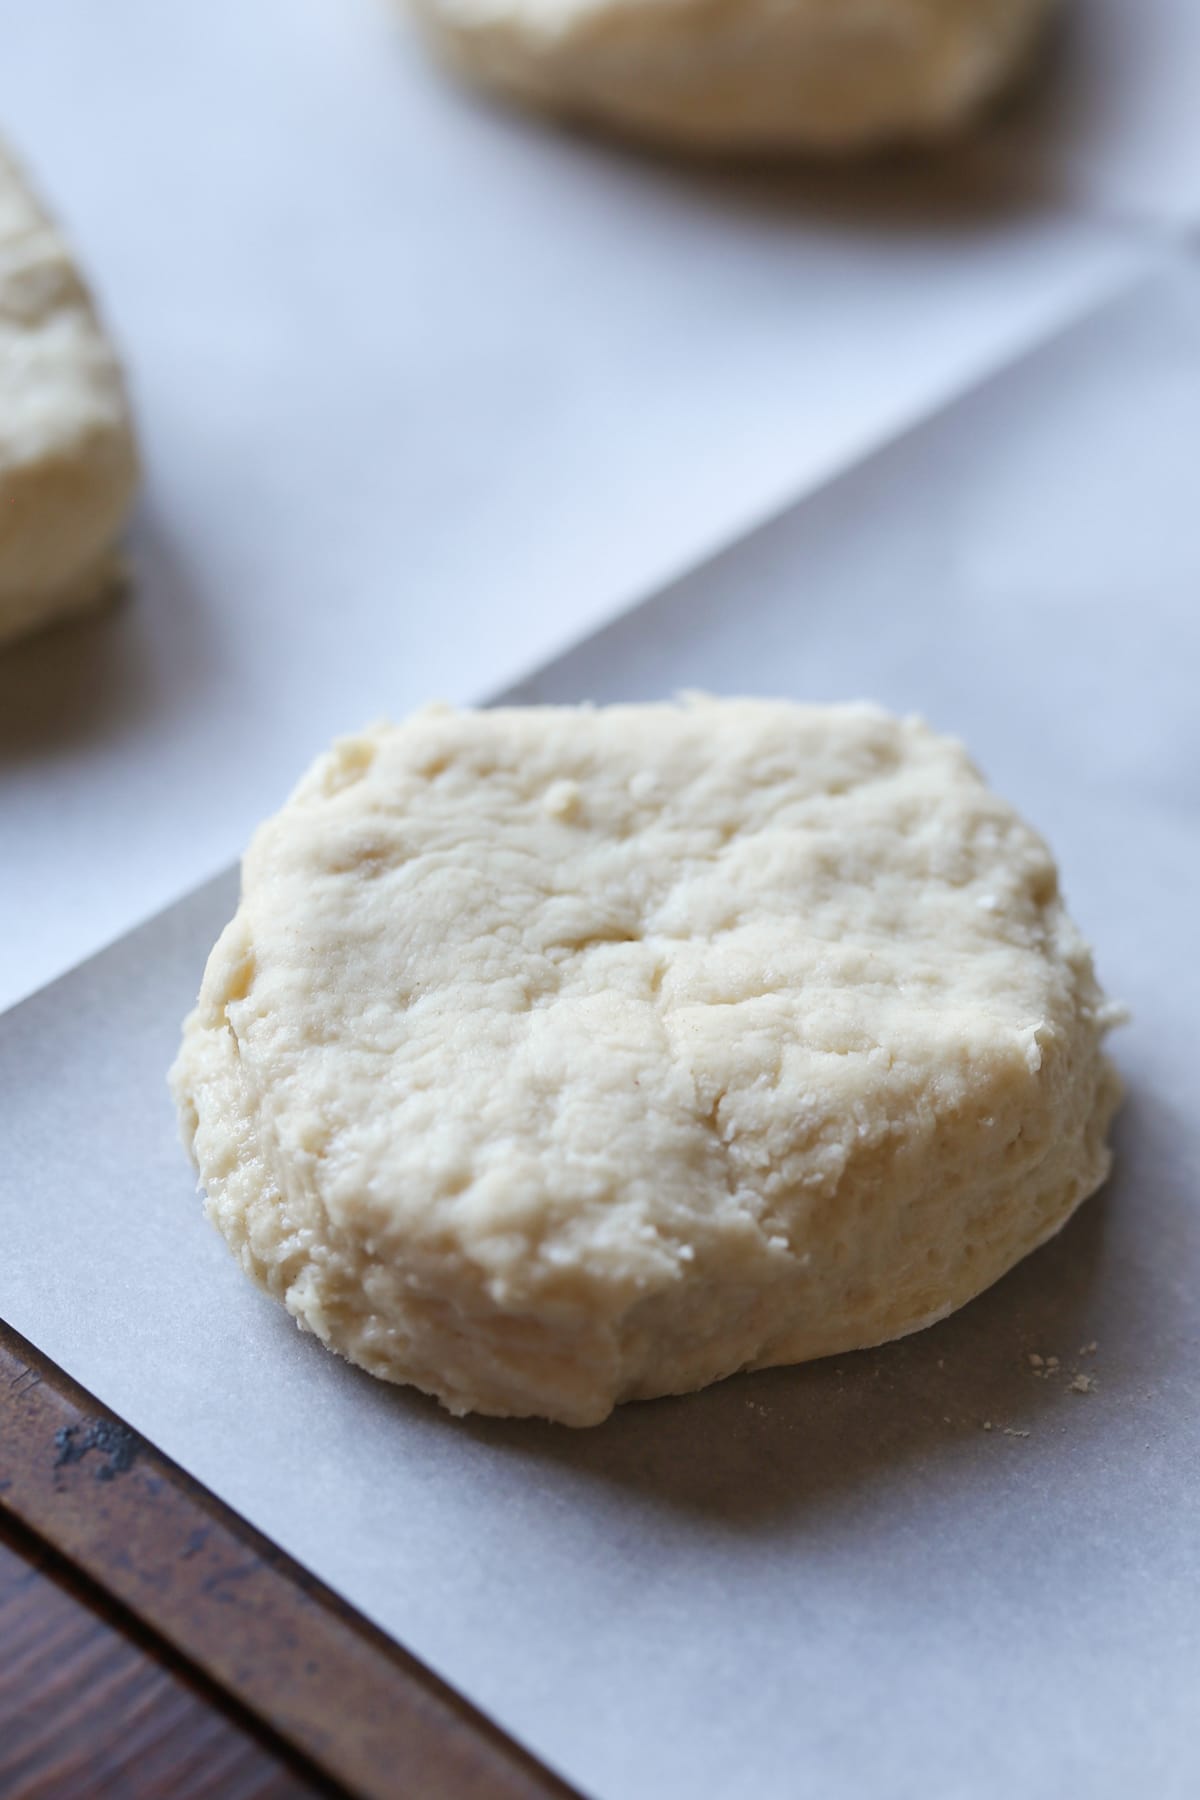 Biscuit dough cut into rounds on a parchment lined baking sheet.